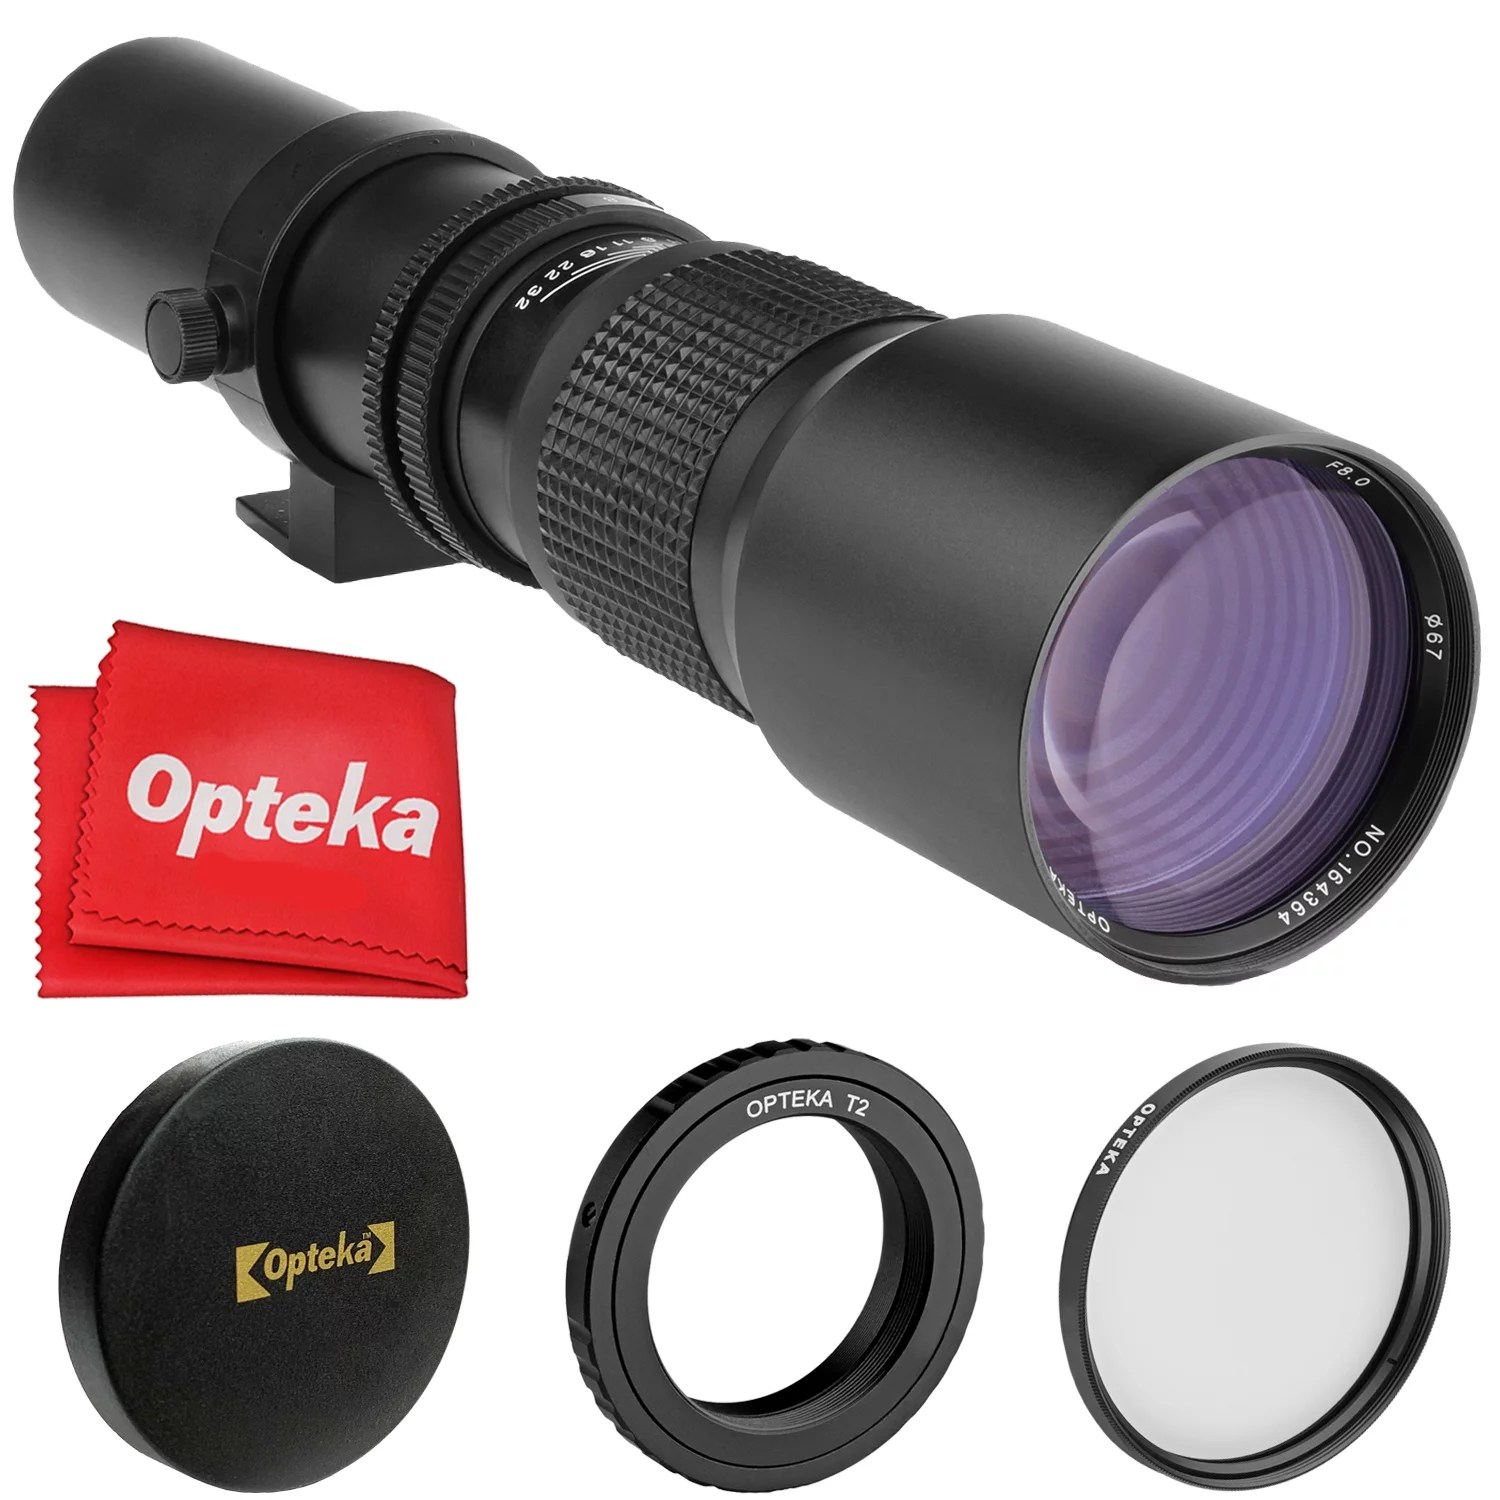 Opteka 500mm f/8 Manual Telephoto Lens for Canon EOS 80D